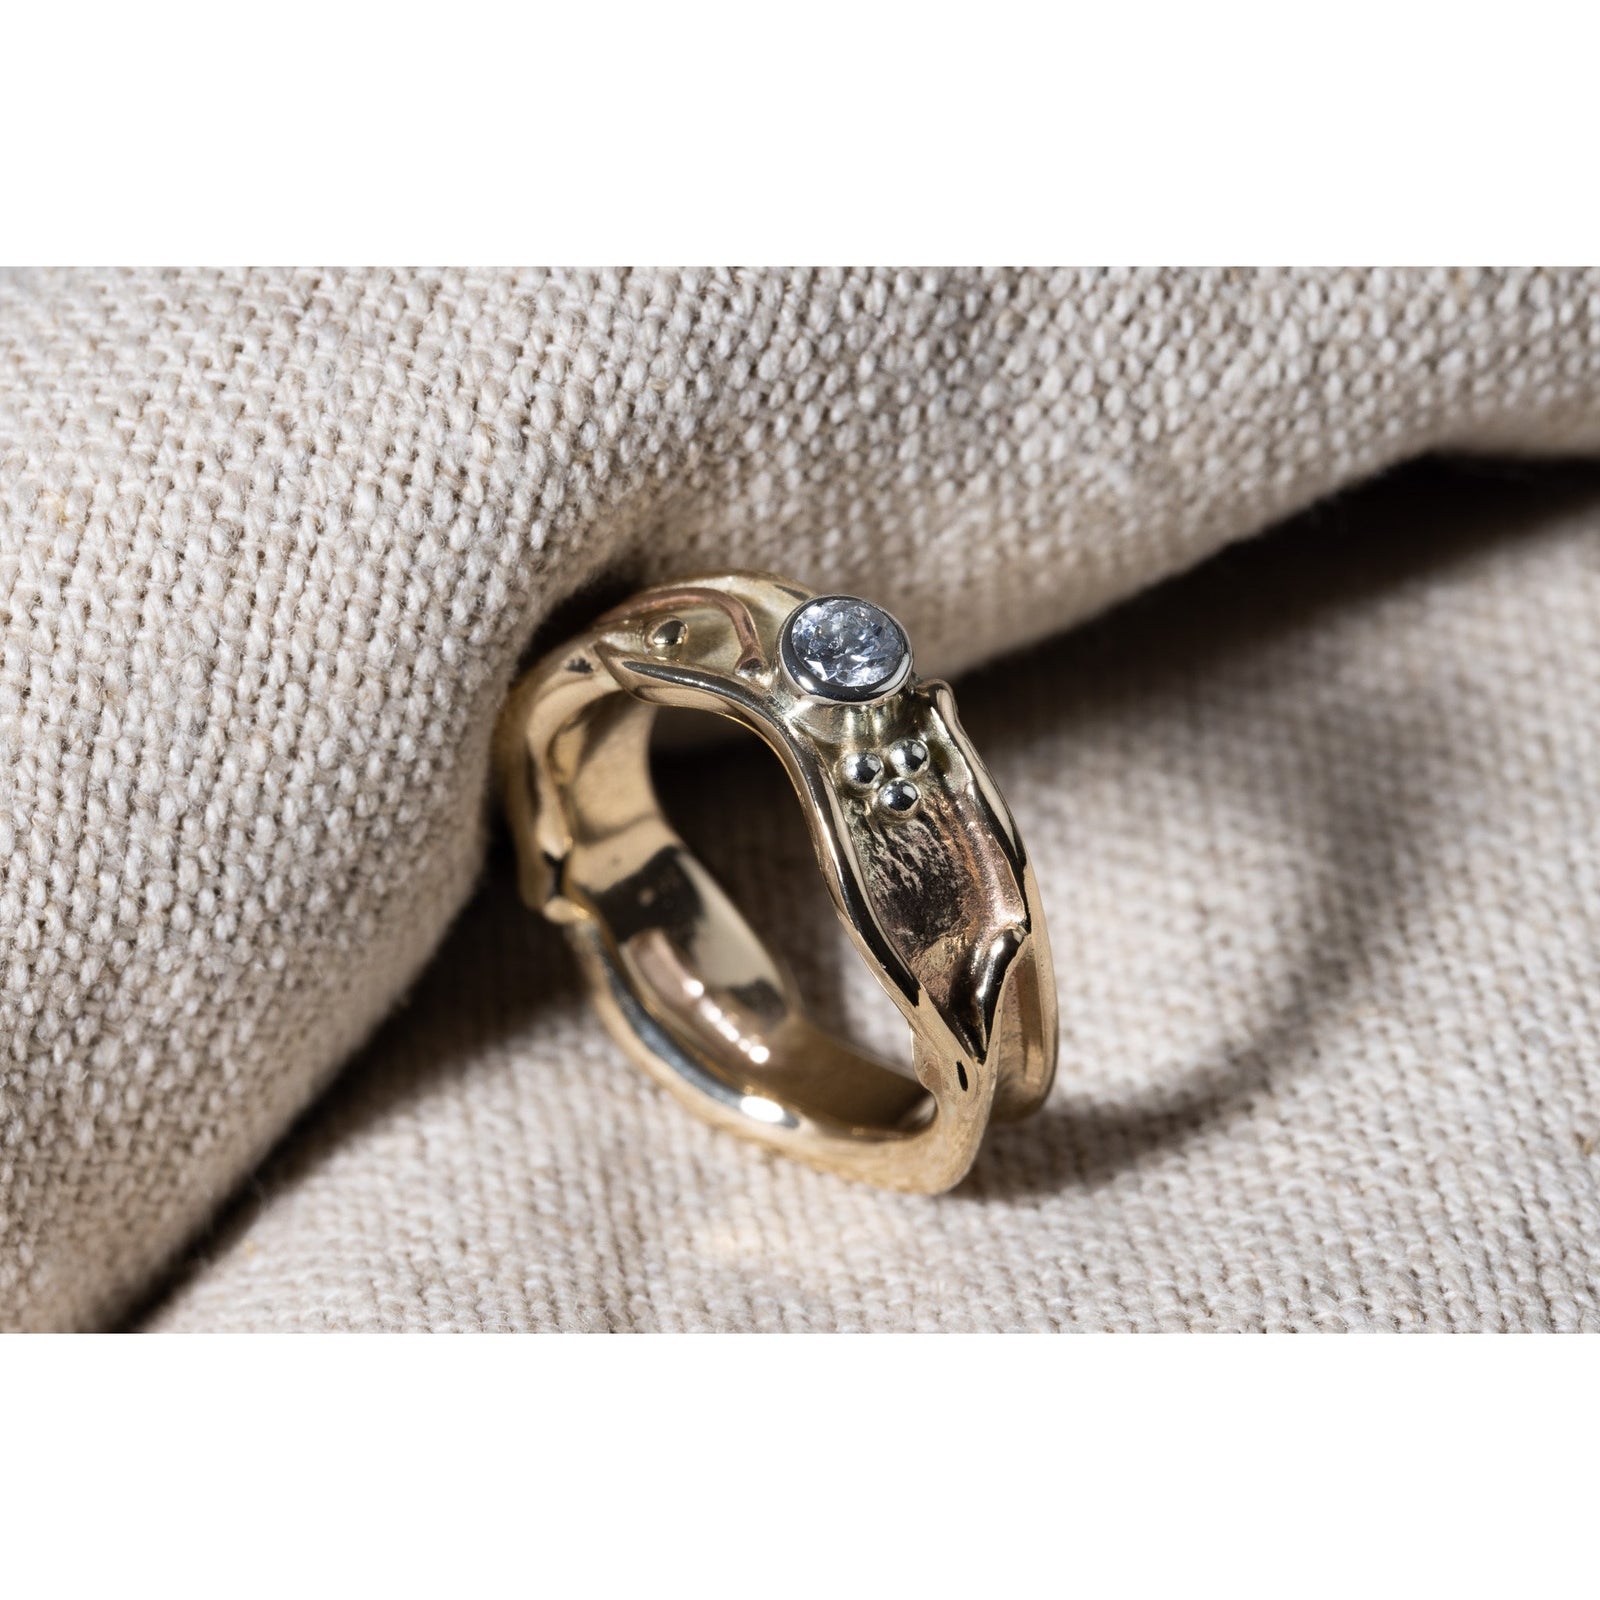 'LG25 9ct Gold & Diamond Ring' by Les Grimshaw, available at Padstow Gallery, Cornwall